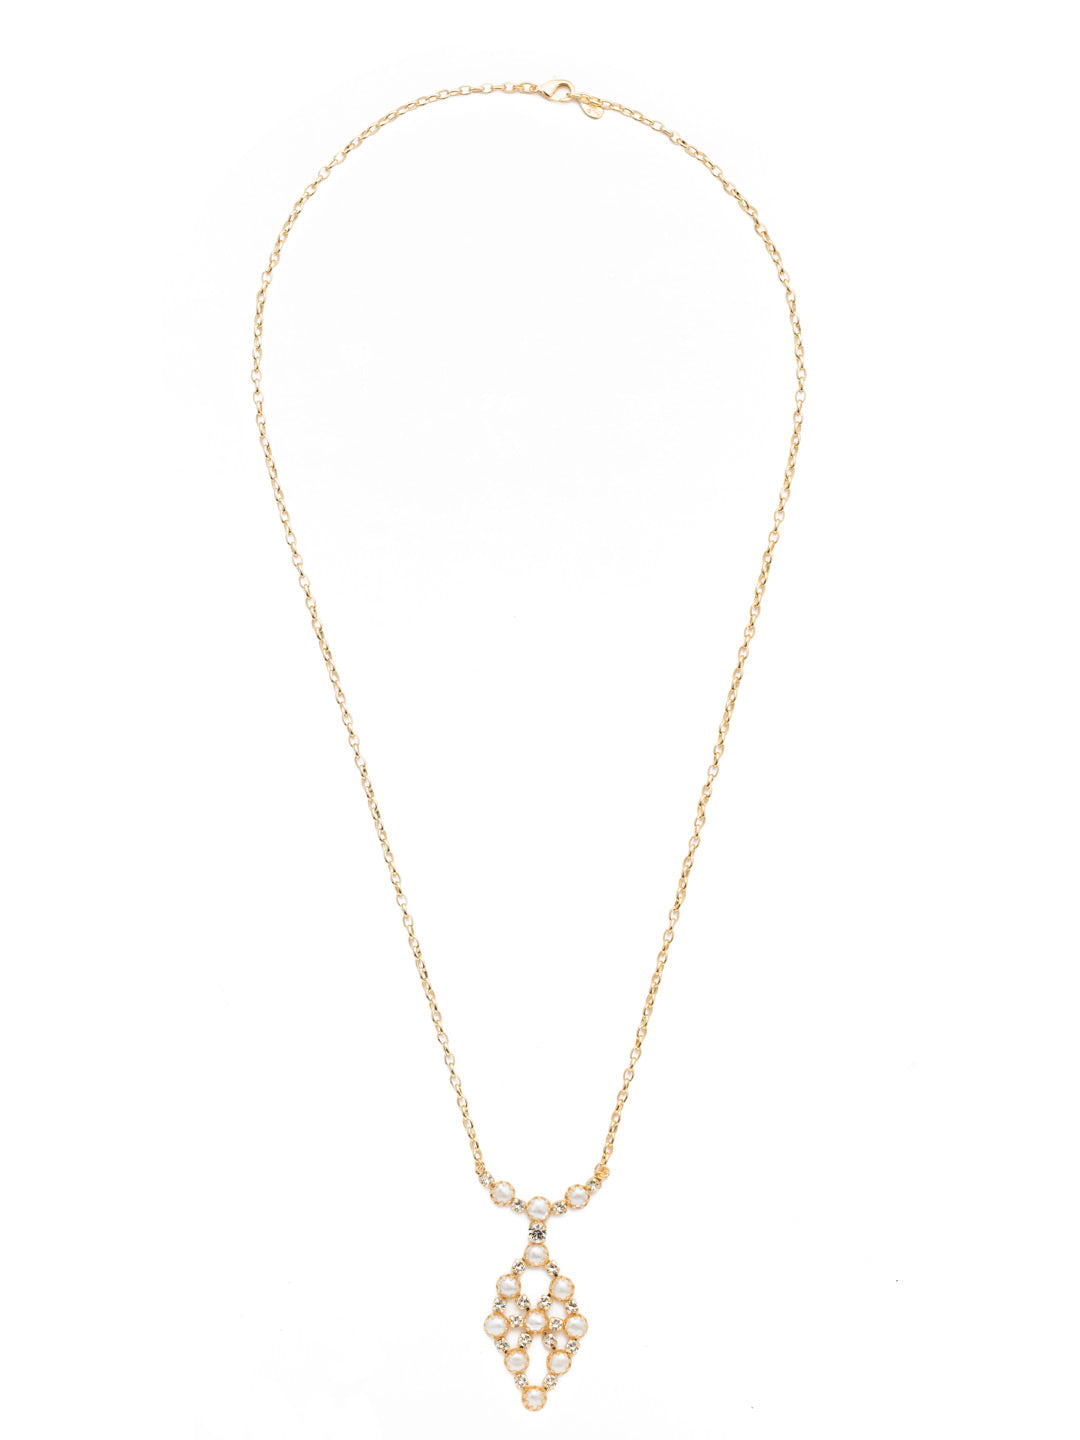 Prudence Pendant Necklace - 4NES1BGMDP - <p>The Prudence Pendant Necklace is an even-keel beauty: not too understated, not in your face. Polished pearls combine with stunning circlular sparkling crystals in a necklace that works for everyday or special occasion wear. From Sorrelli's Modern Pearl collection in our Bright Gold-tone finish.</p>